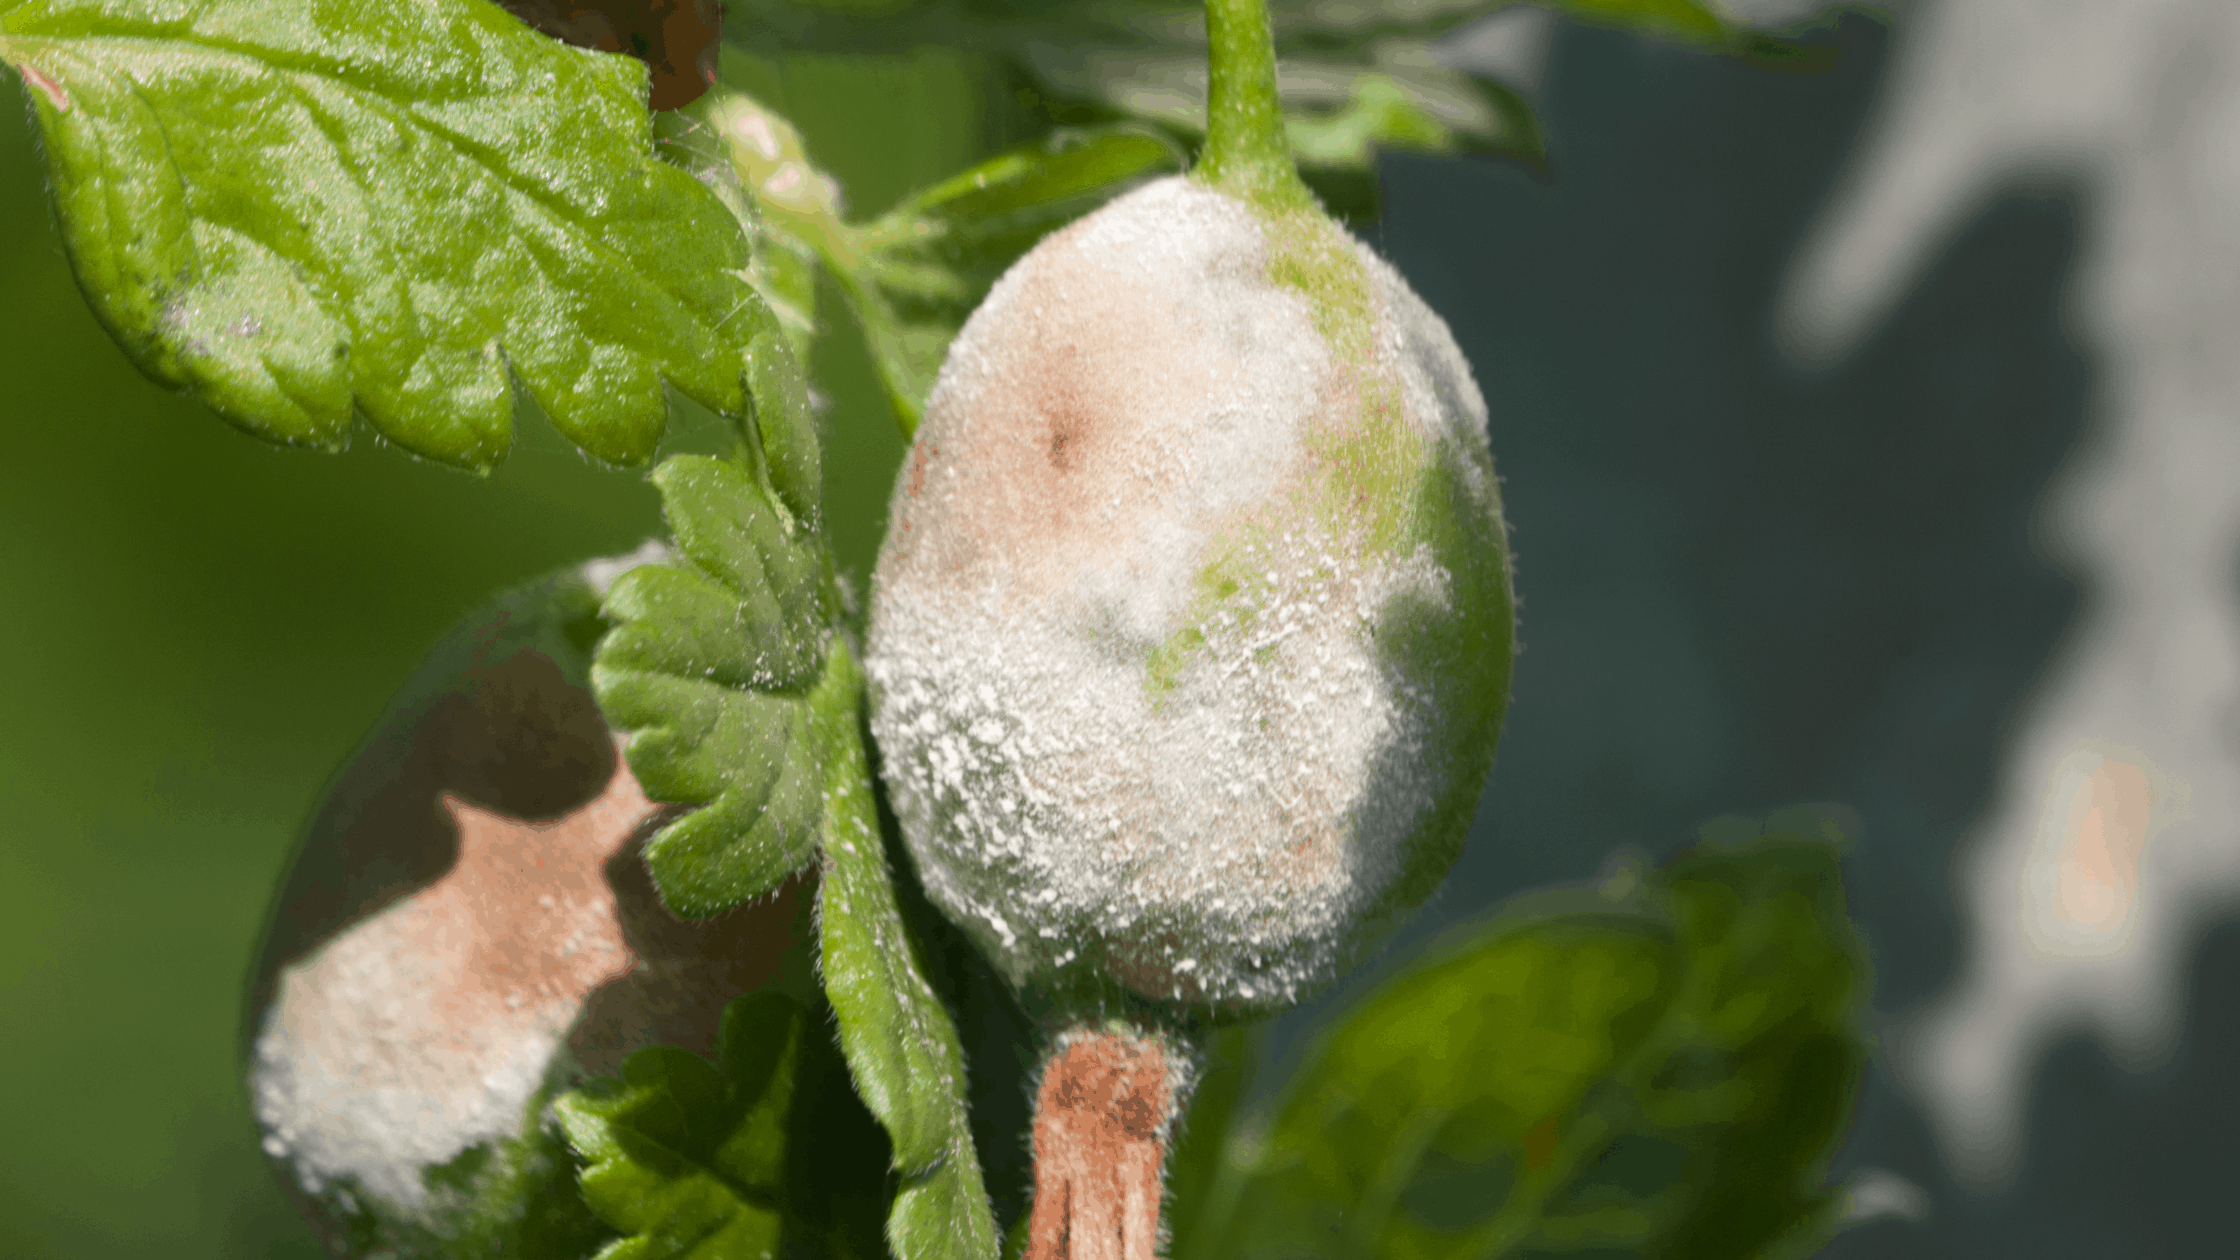 Looking for a solution for dealing with the mold & mildew on your vegetable plants? Learn the tips you need to deal with this issue in your vegetable garden.